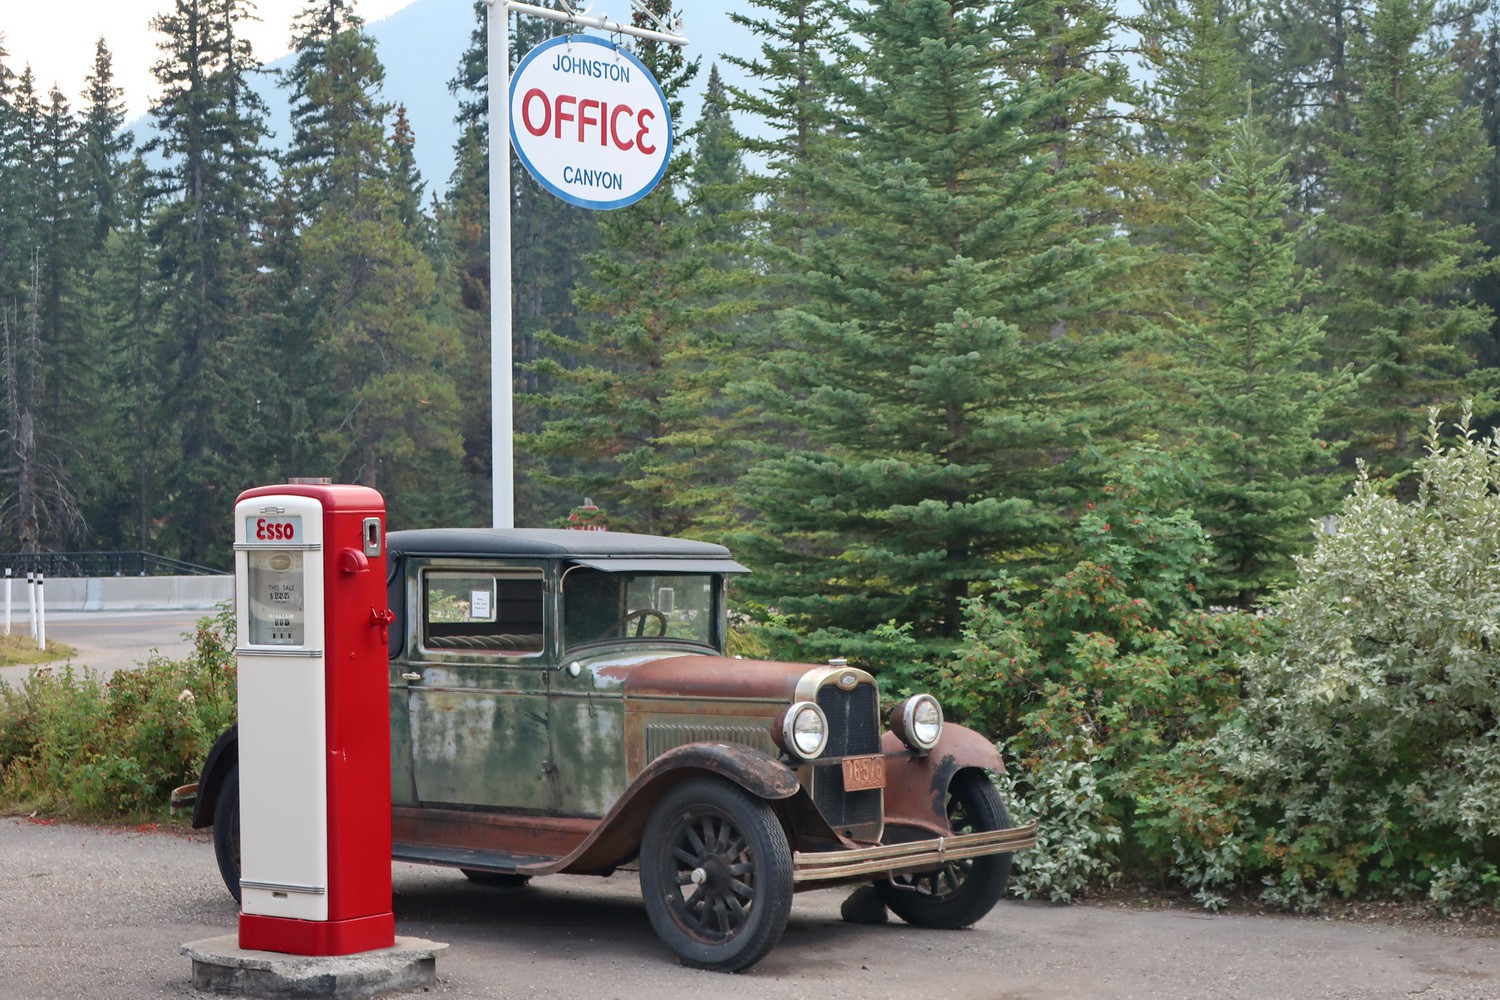 Another oldtimer with an ancient gas station